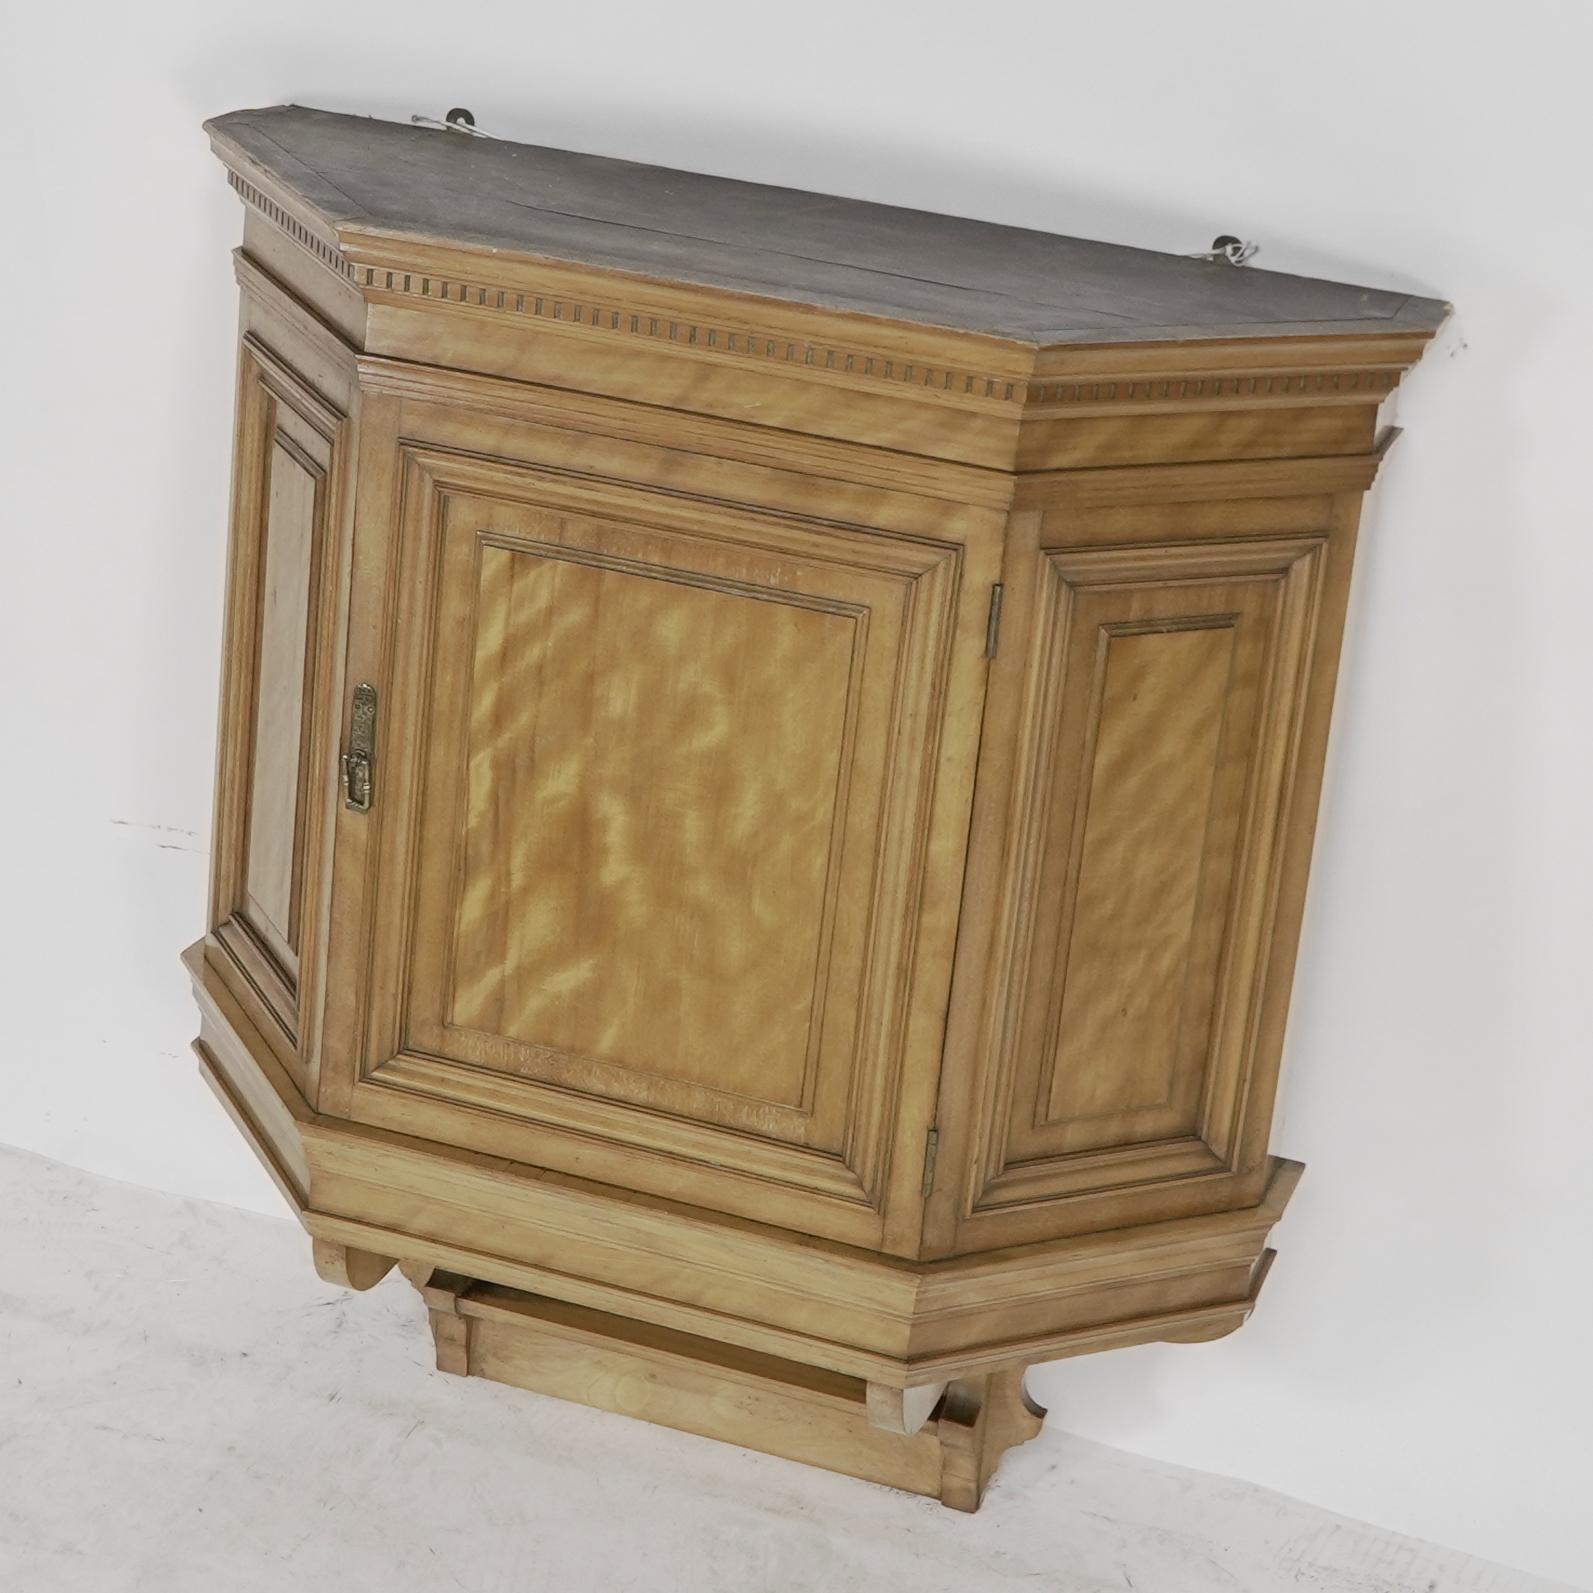 Collinson and Lock. An Aesthetic Movement Satin walnut breakfront wall cupboard with a dentil cornice, and Japanese basket weave detailing to the brass handle.
